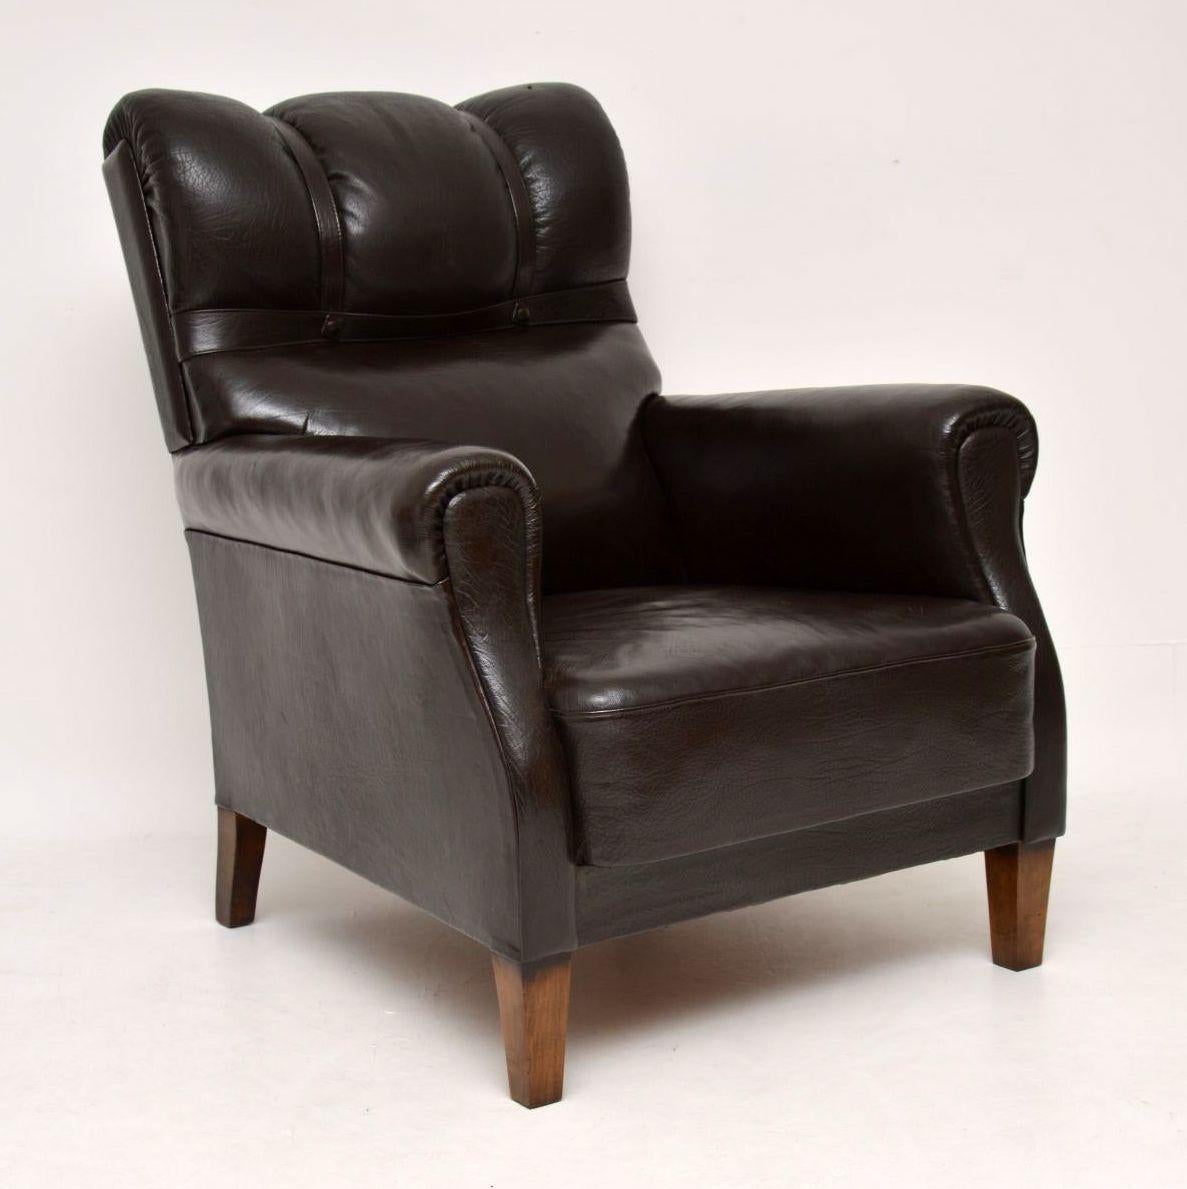 Pair of Antique Swedish Leather Armchairs 1